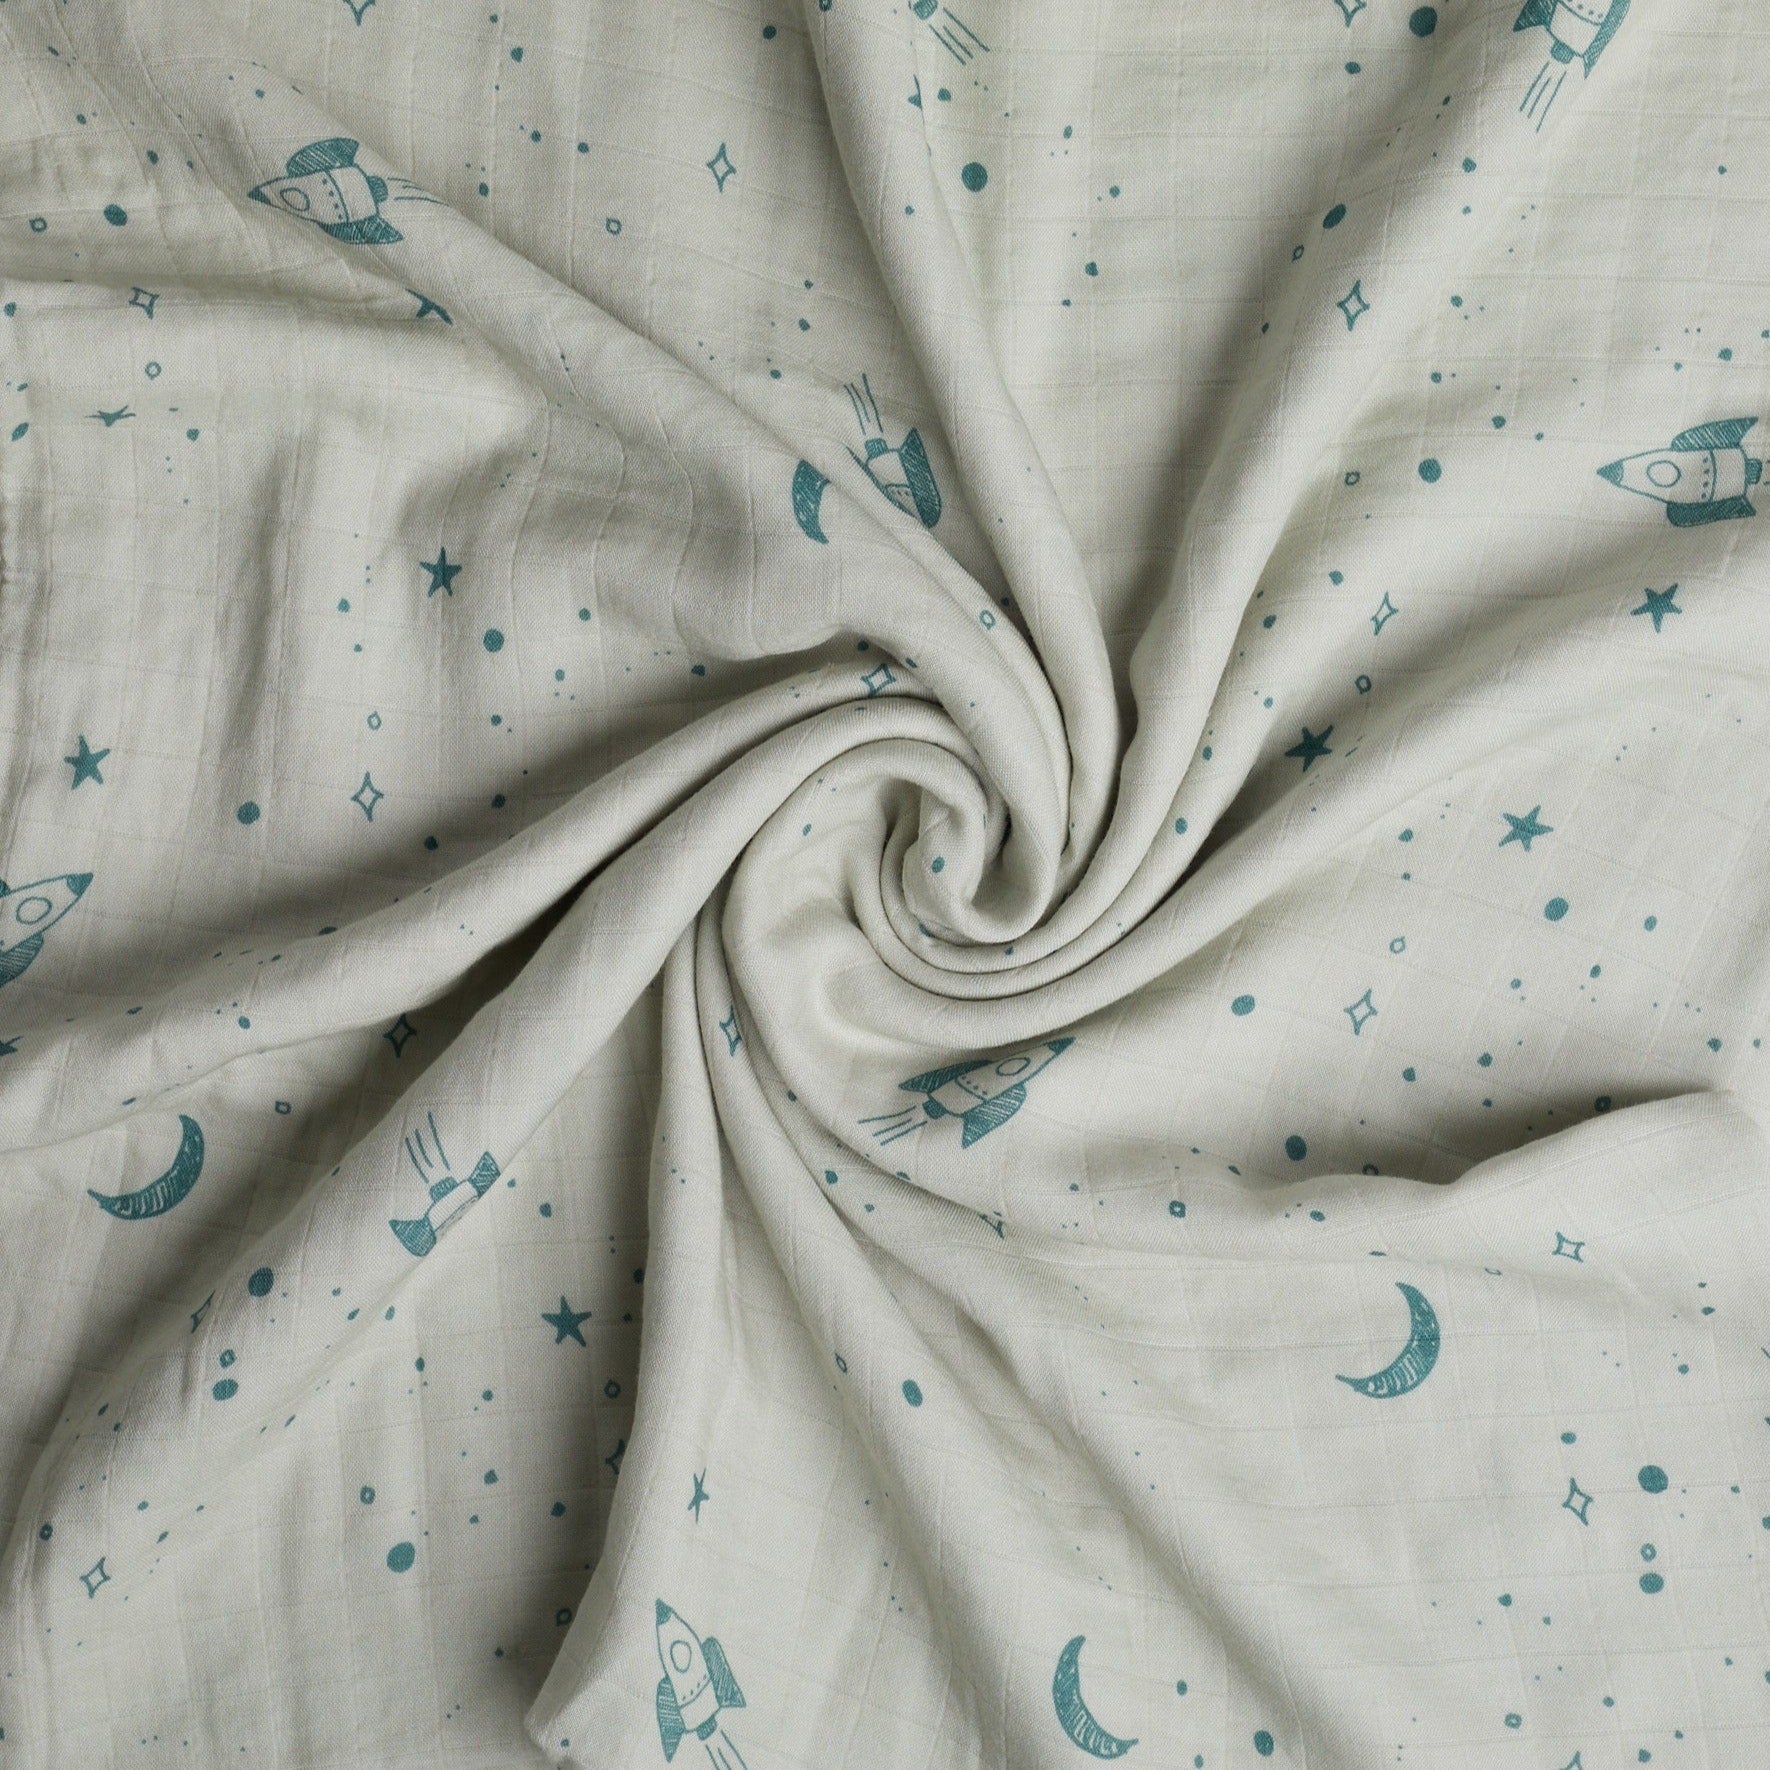 Out of This World Swaddle, in a swirl.